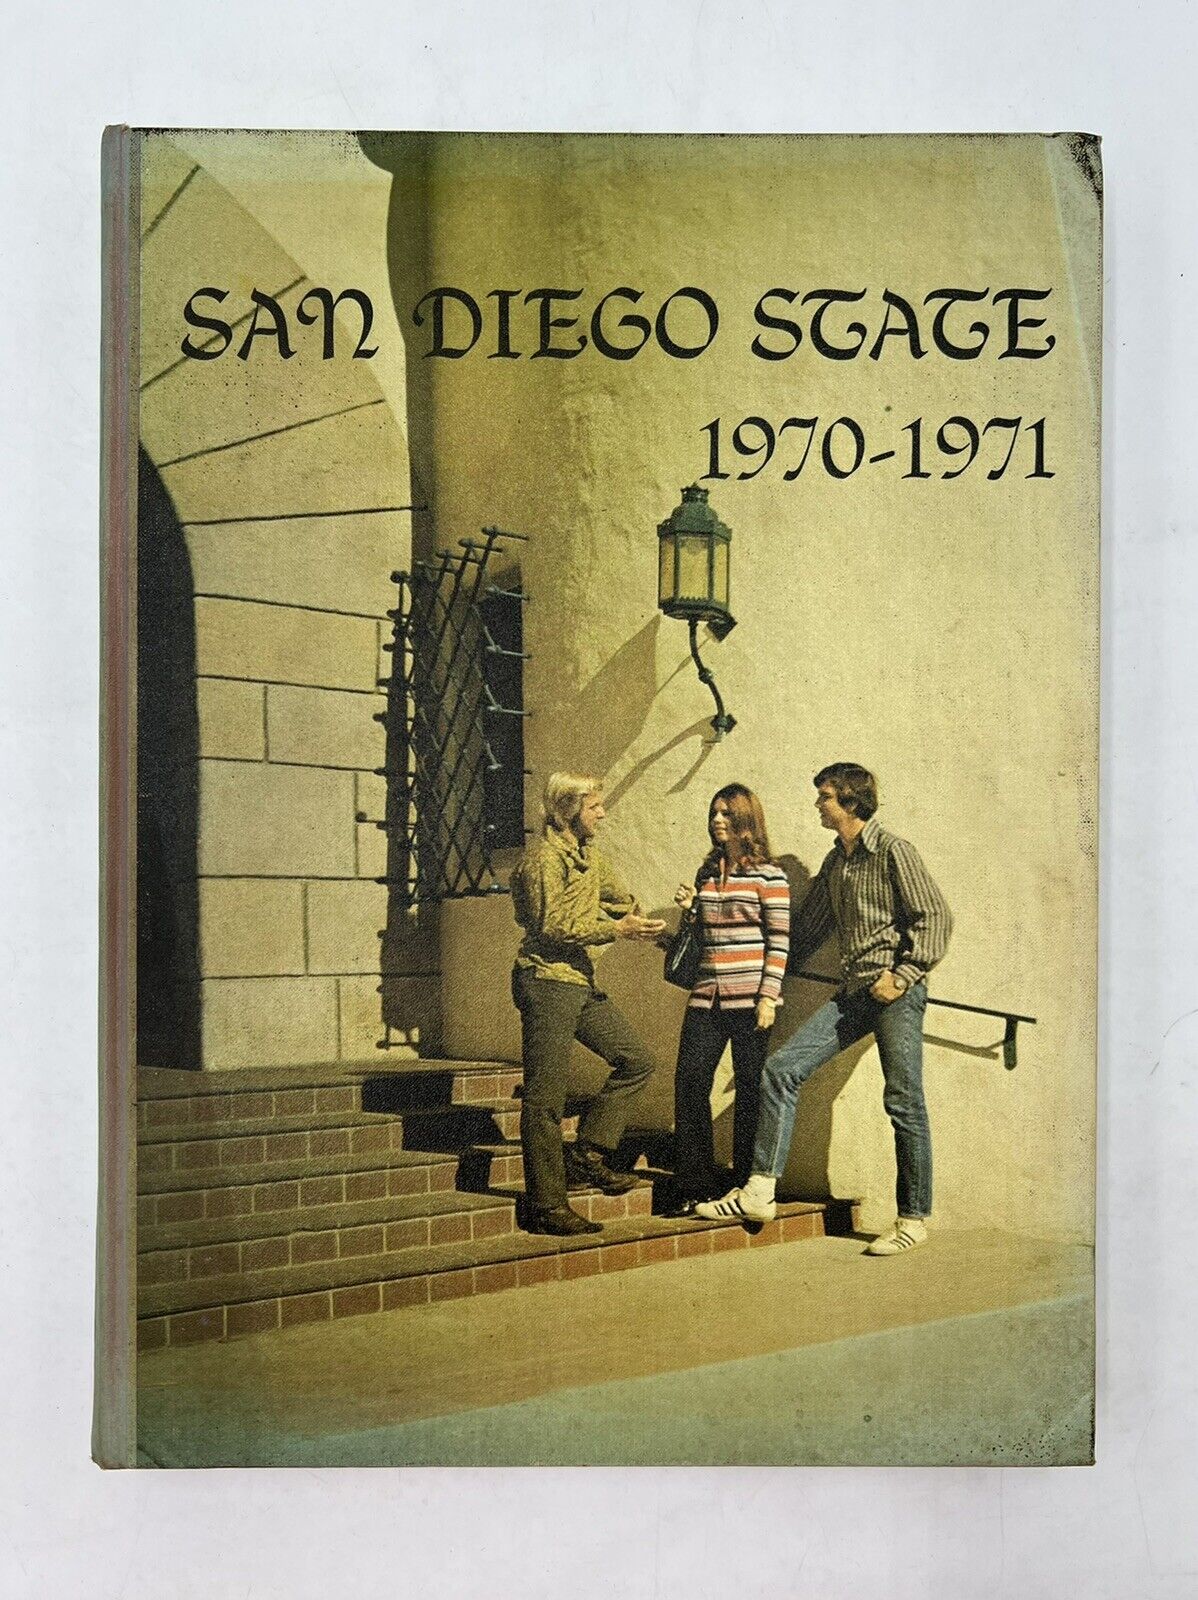 San Diego State 1970-1971 Yearbook “Del Sudoeste” San Diego, California UNMARKED